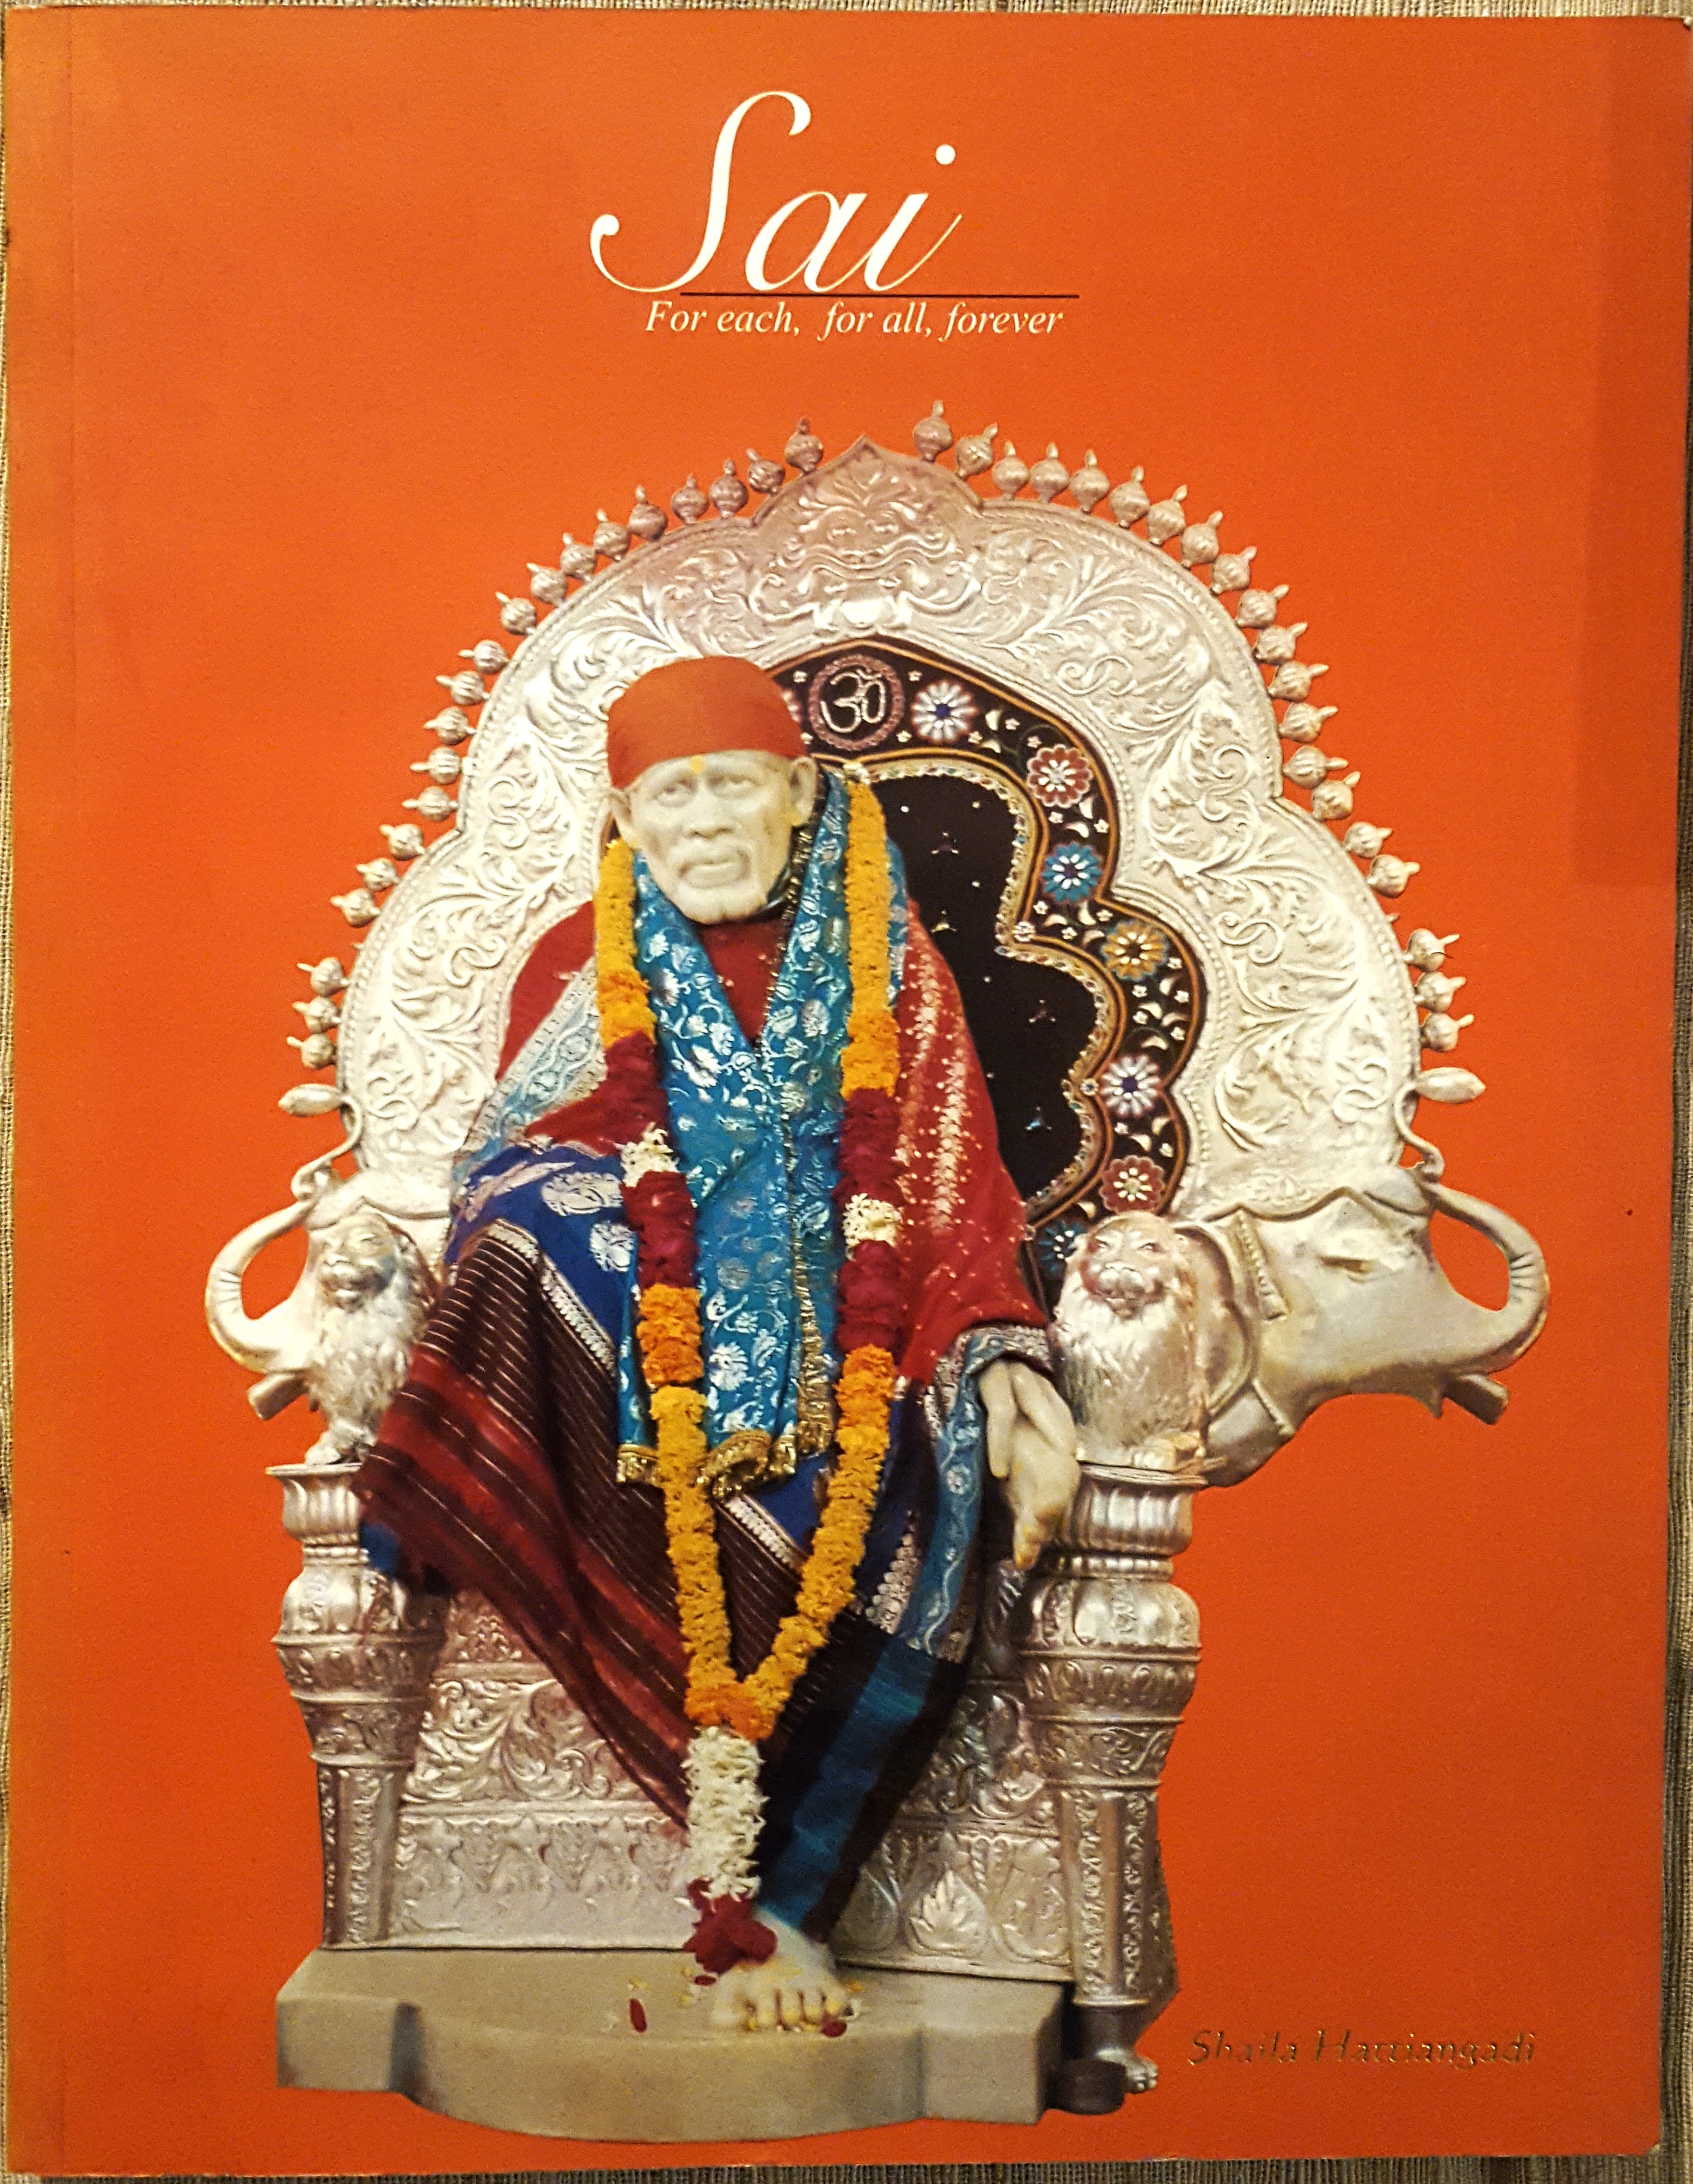 Shirdi Sai Baba Temple Frankfurt Germany (Deutschland) recommended book - Sai - for each, for all, forever .